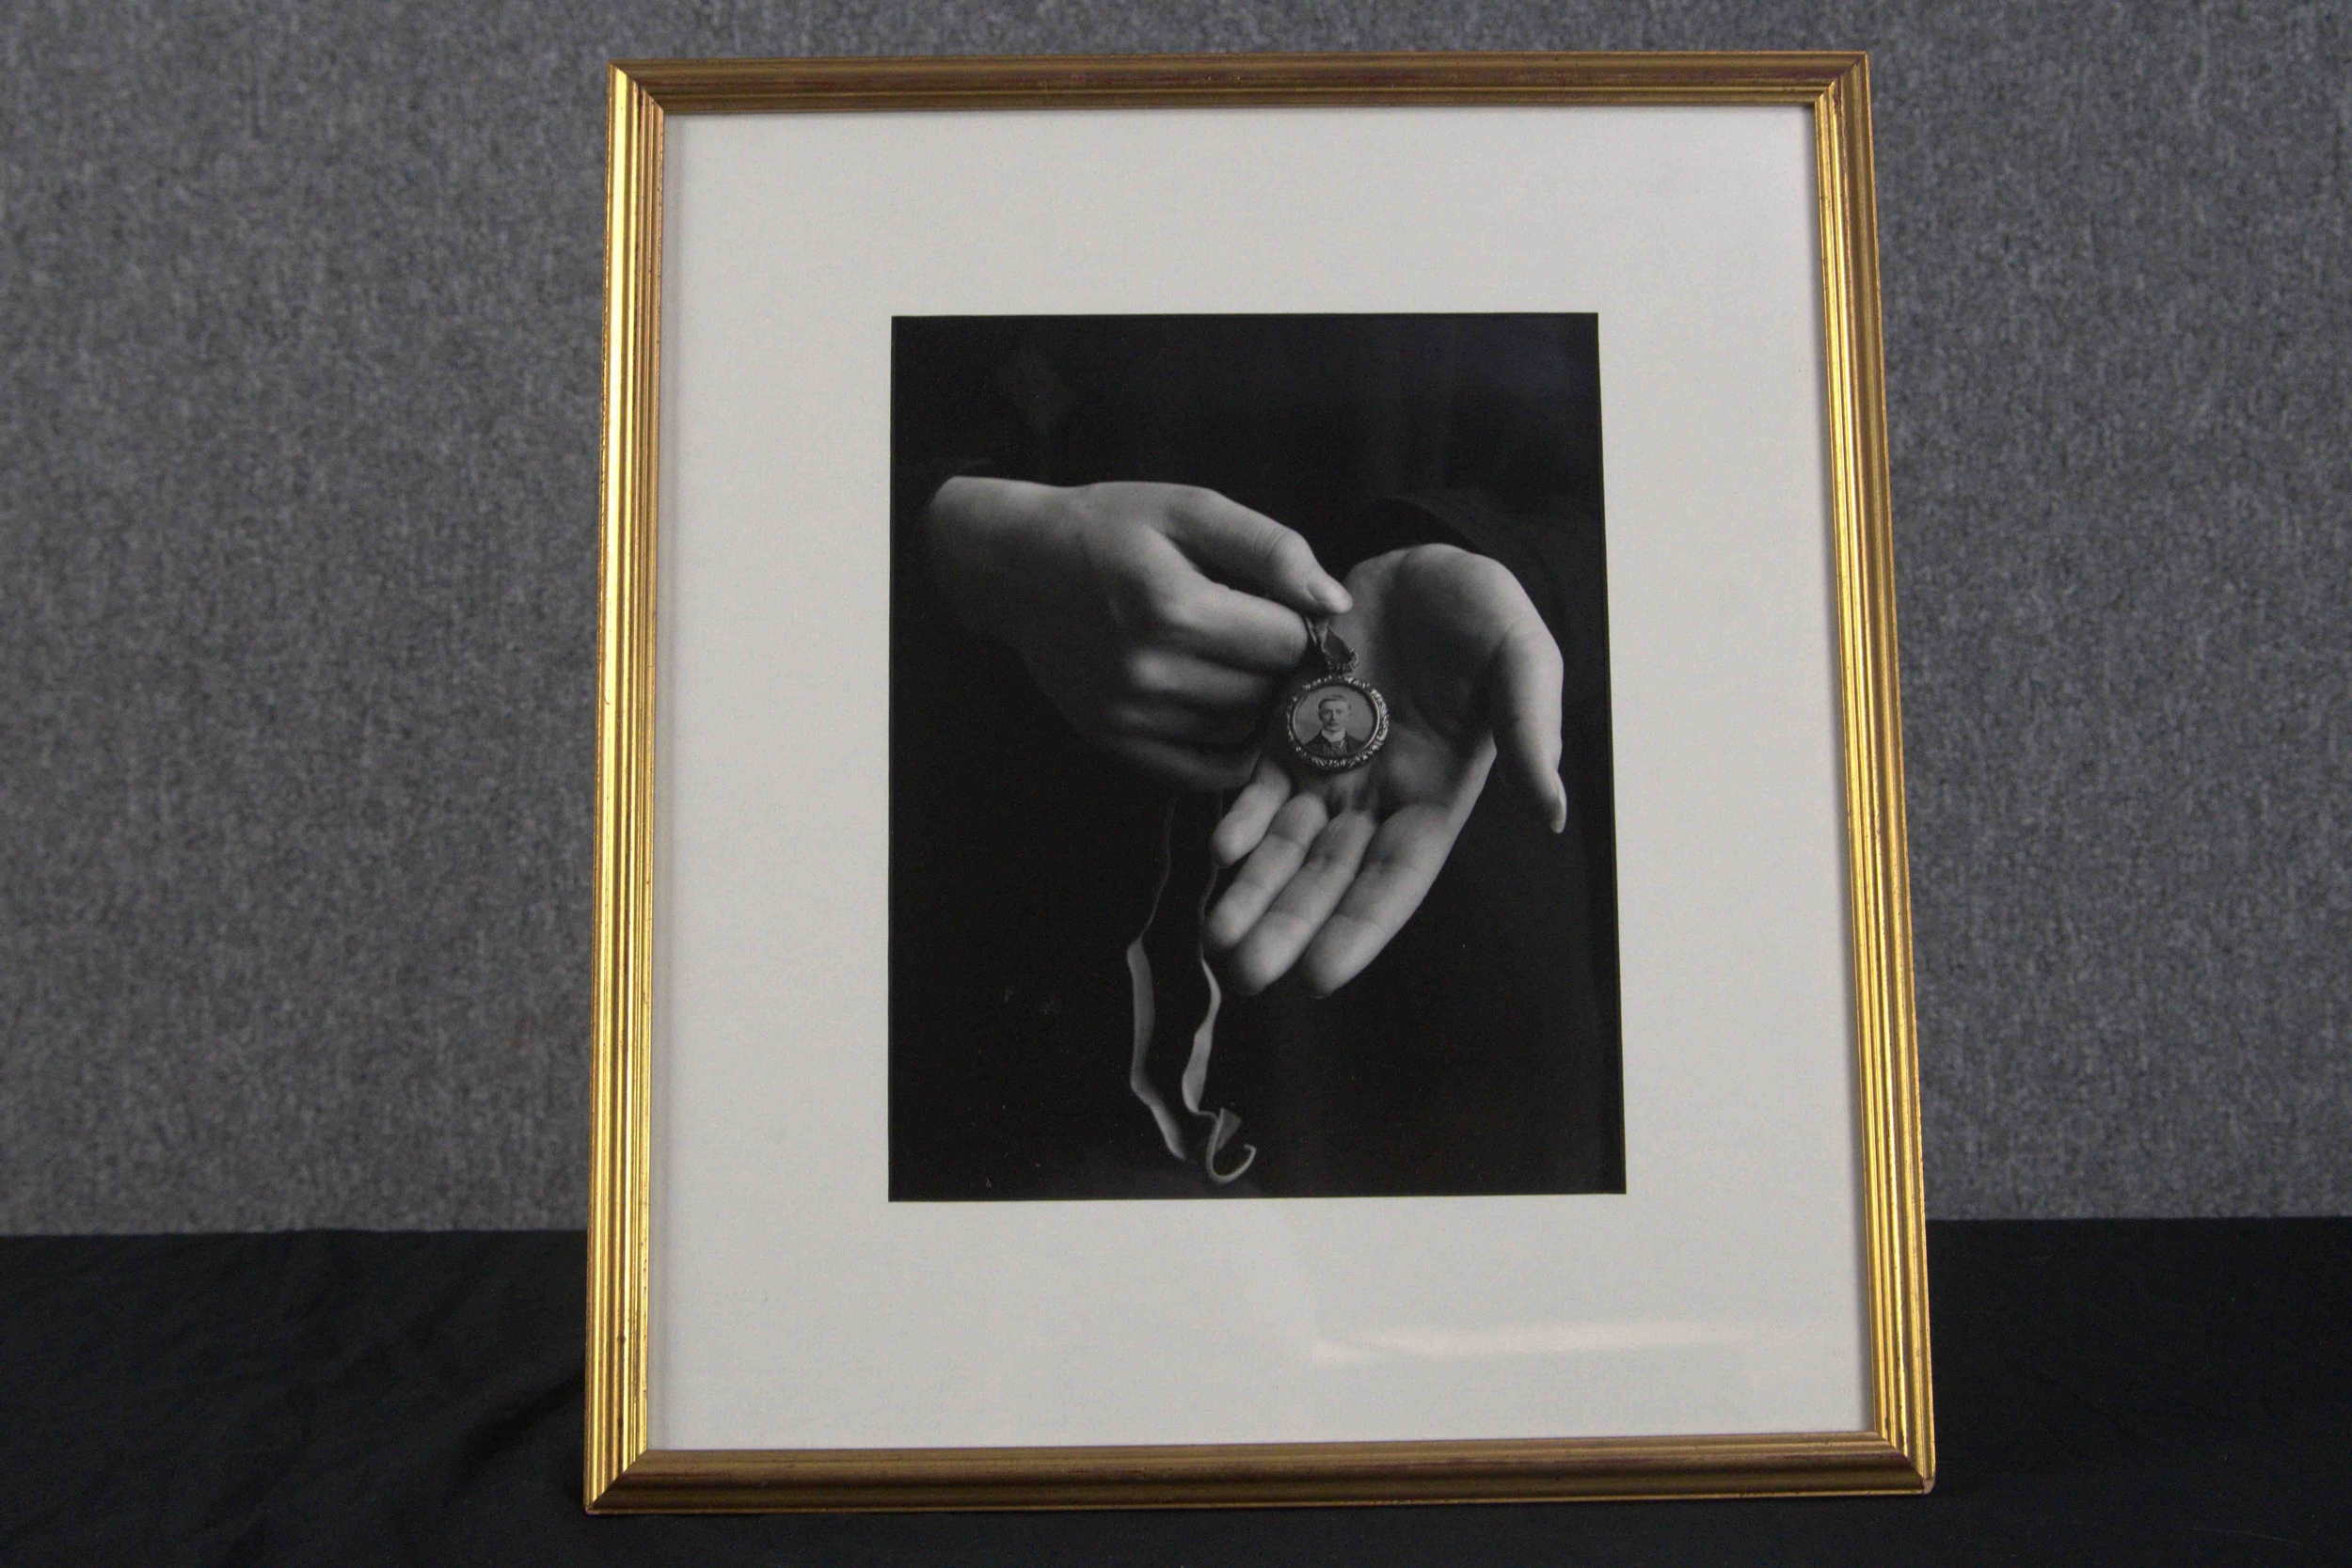 Jane E. Clark. Photograph. Hands holding a locket. From the artis'ts Great War series of works. - Image 2 of 3